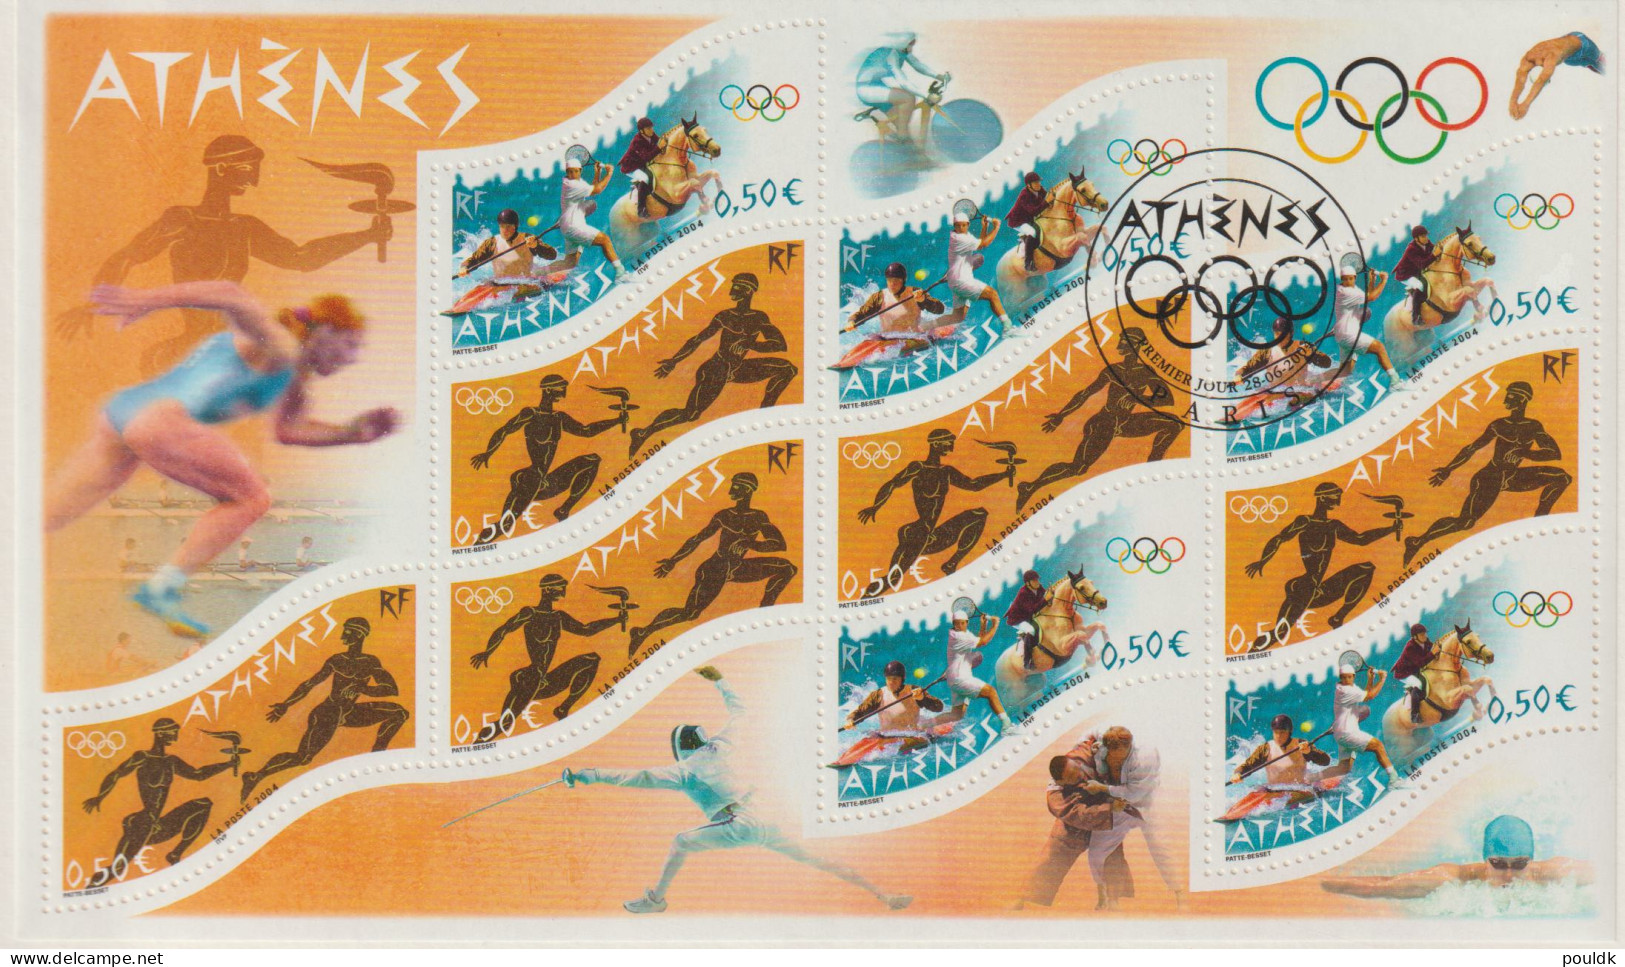 France 2004 Olympic Games Athens Souvenir Sheet Used On French Postal Folder. Postal Weight Approx 99 Gramms - Zomer 2004: Athene